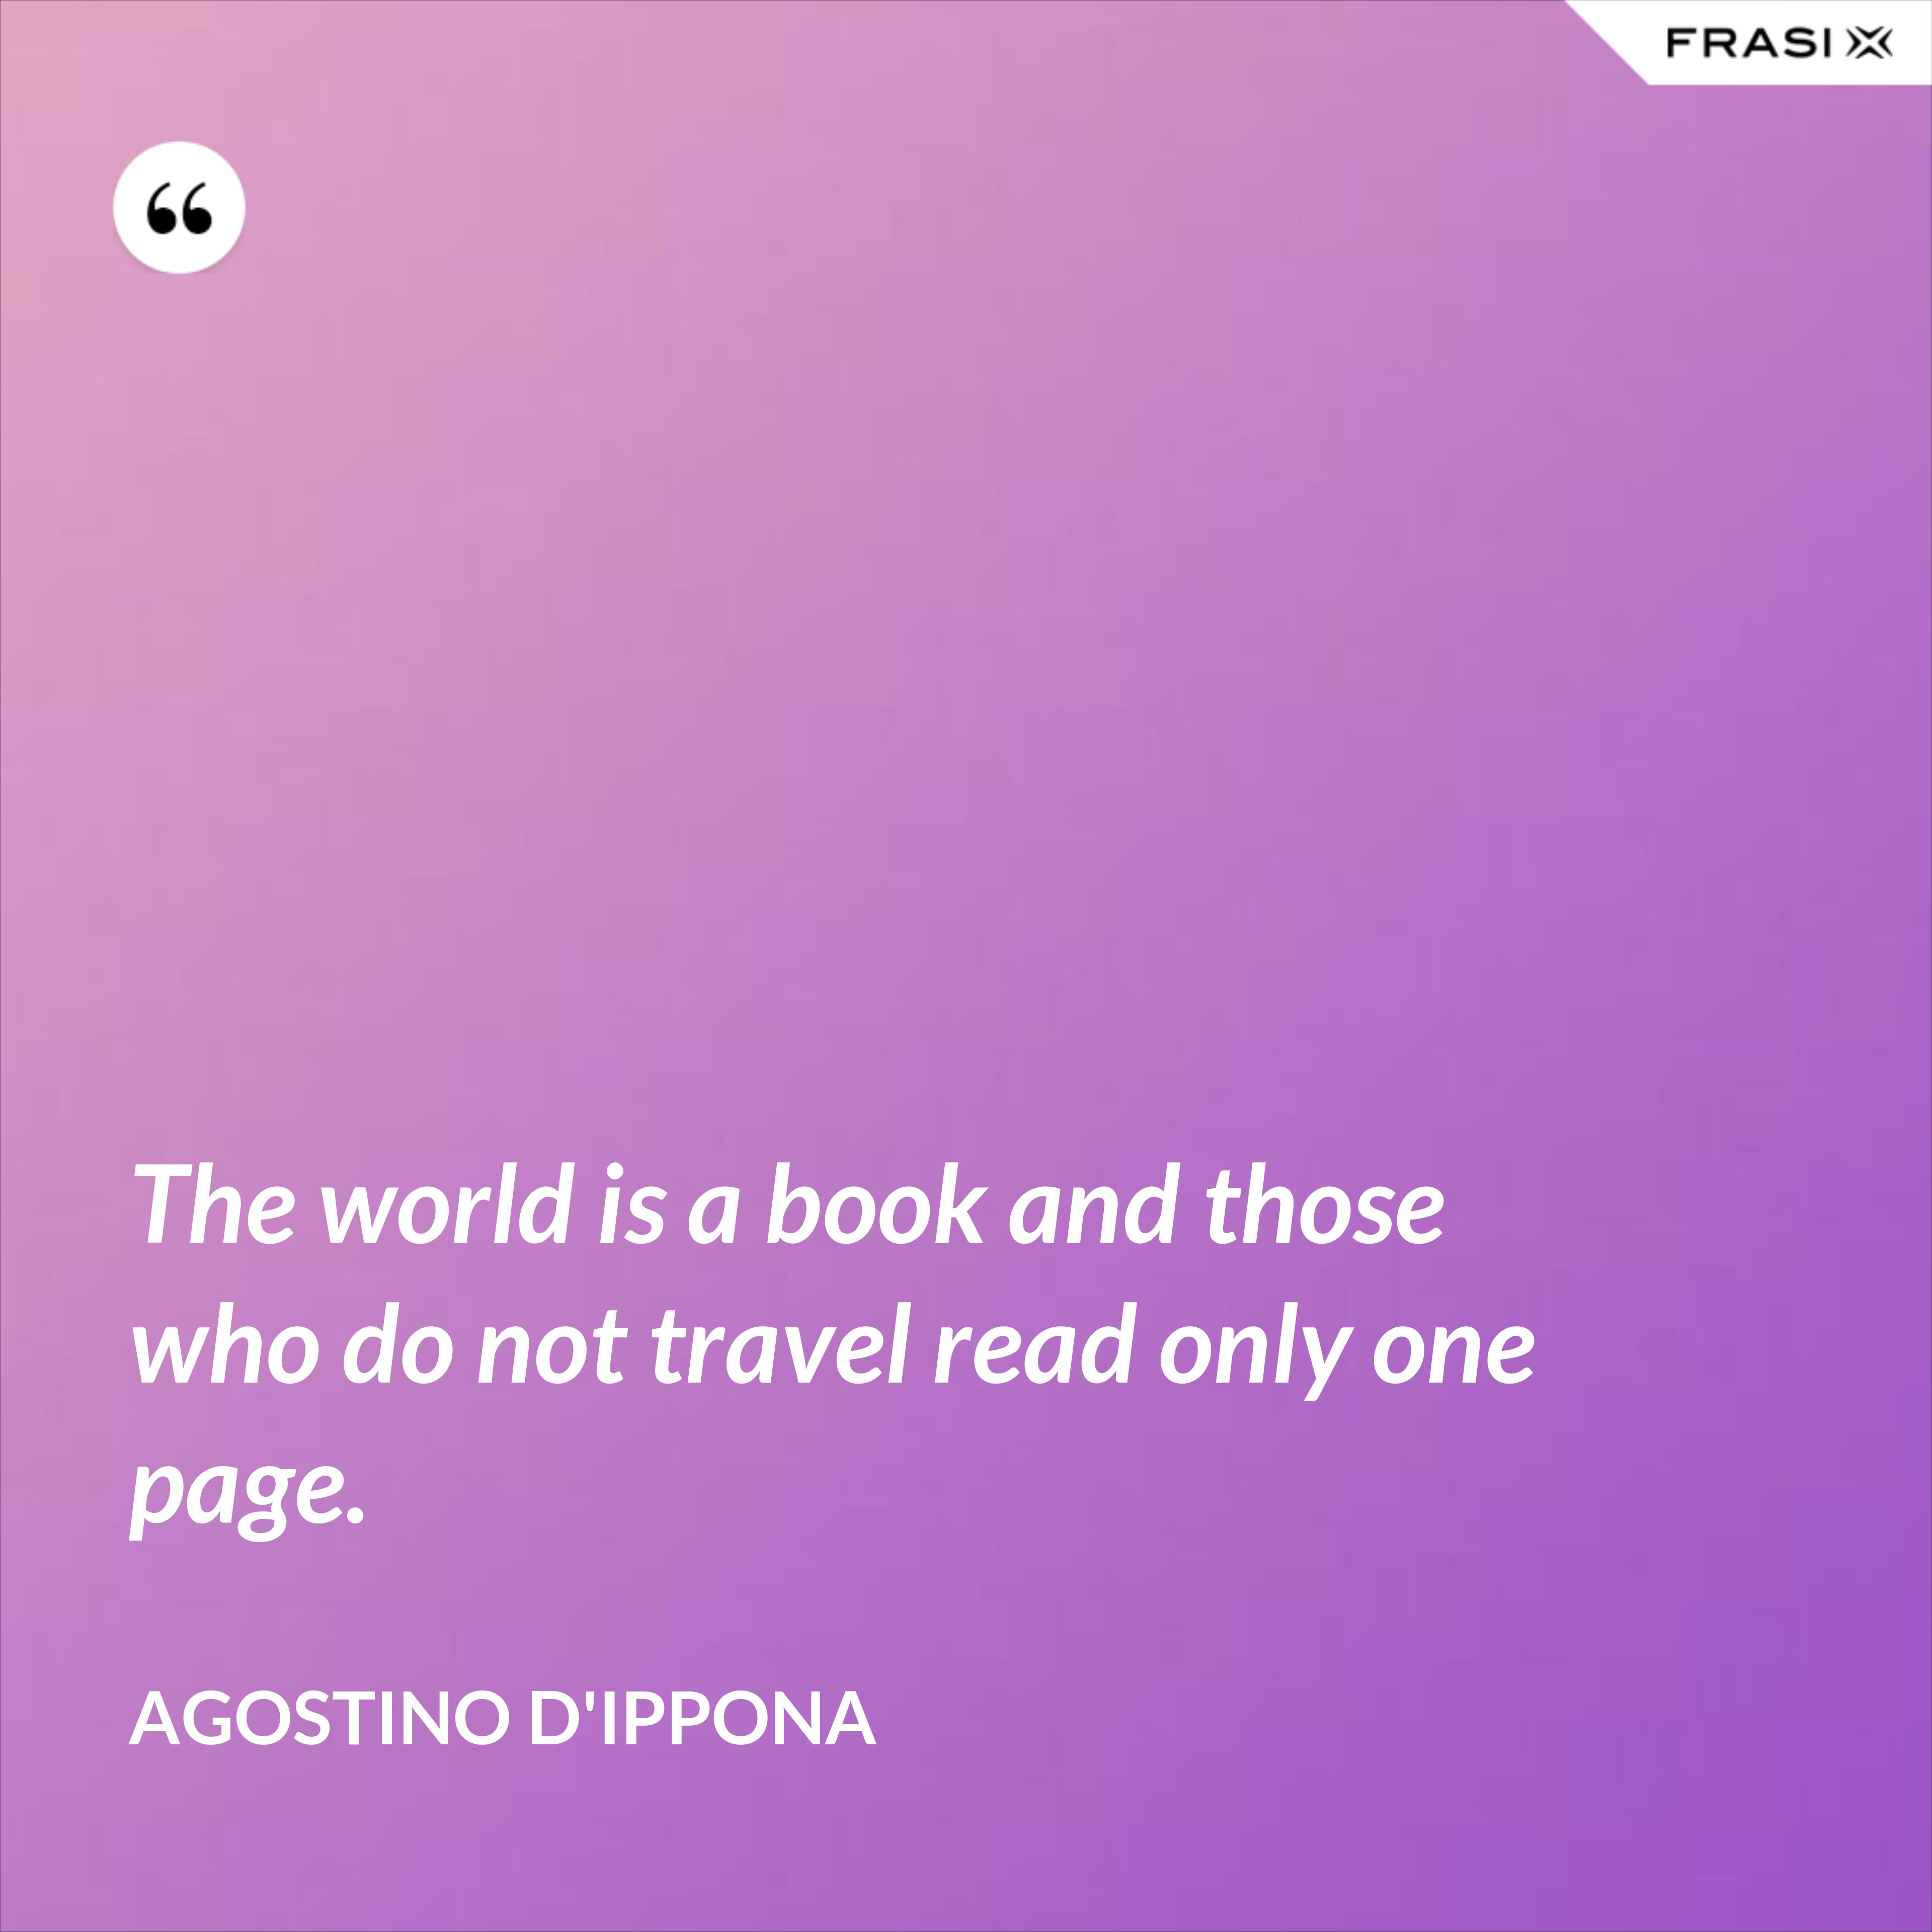 The world is a book and those who do not travel read only one page. - Agostino d'Ippona